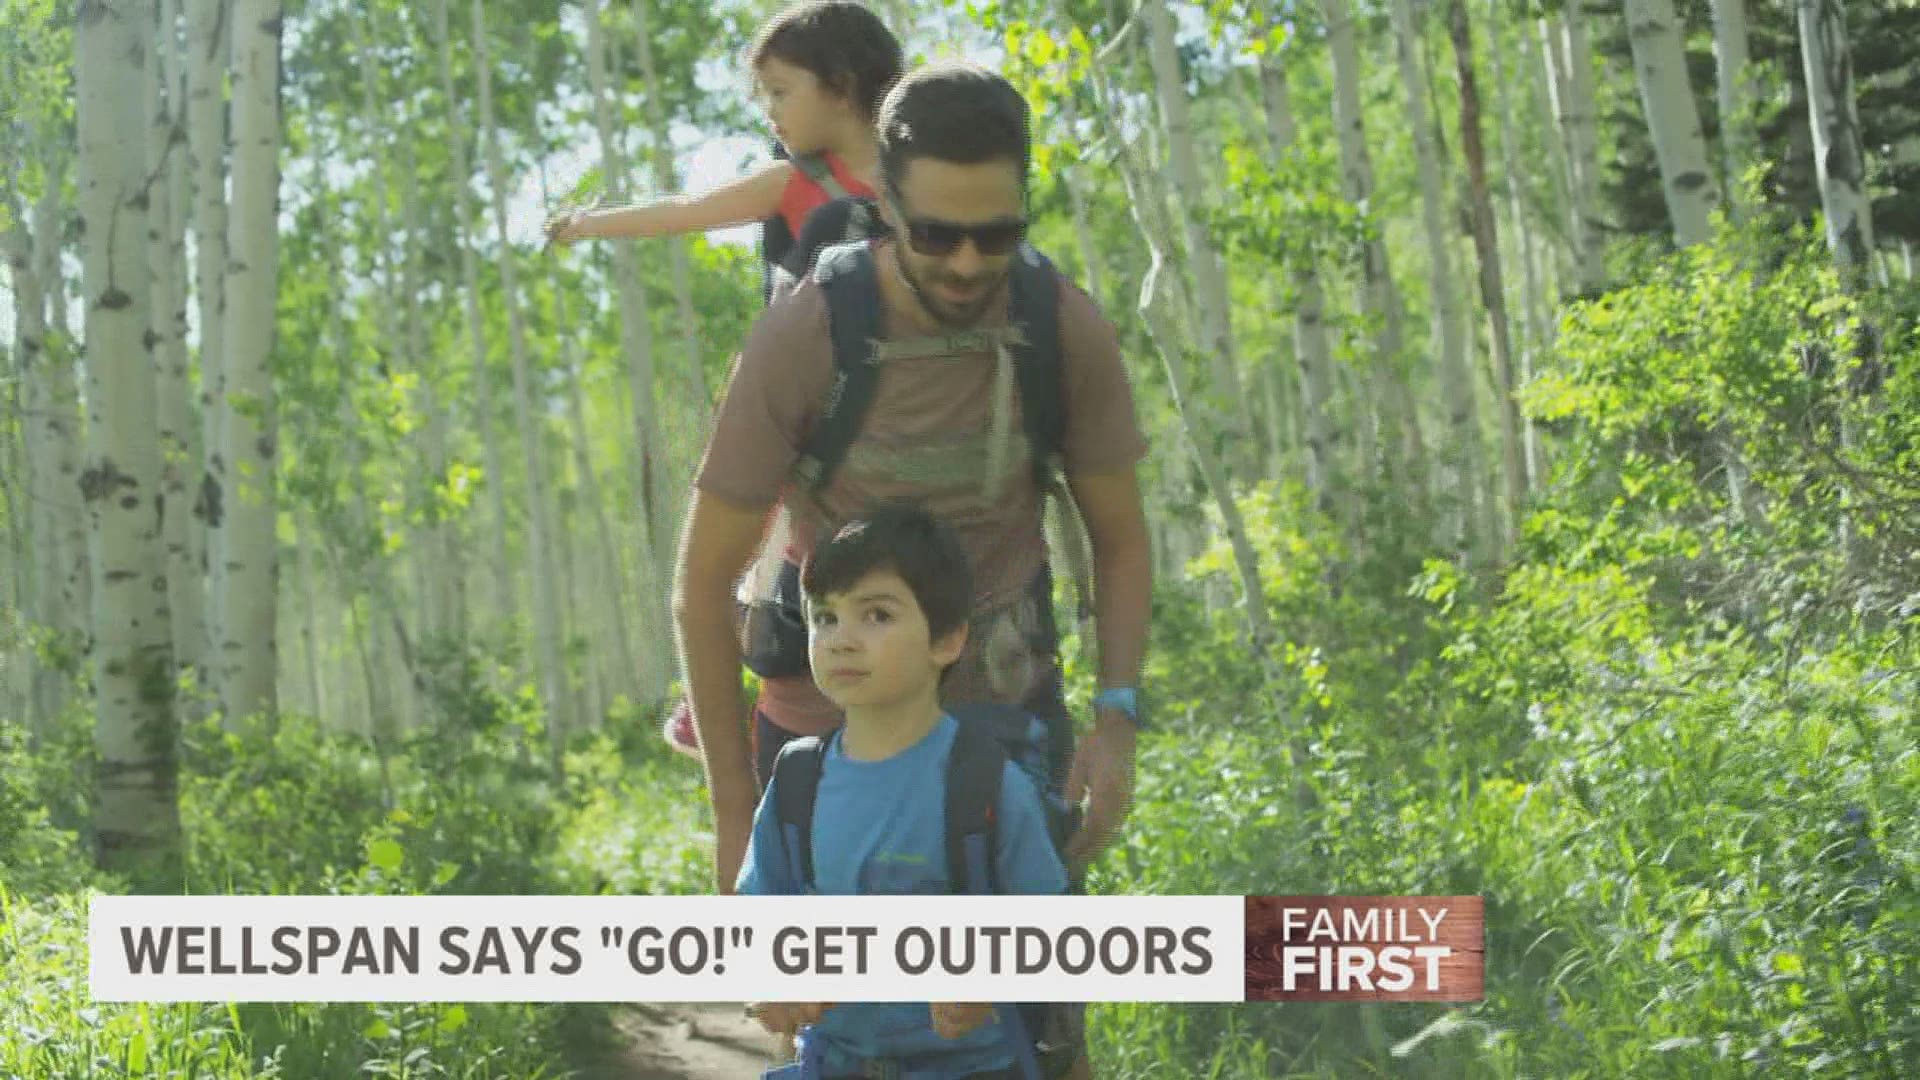 The health network has brought back its "Get Outdoors!" program which encourages hiking and reading as a family activity.